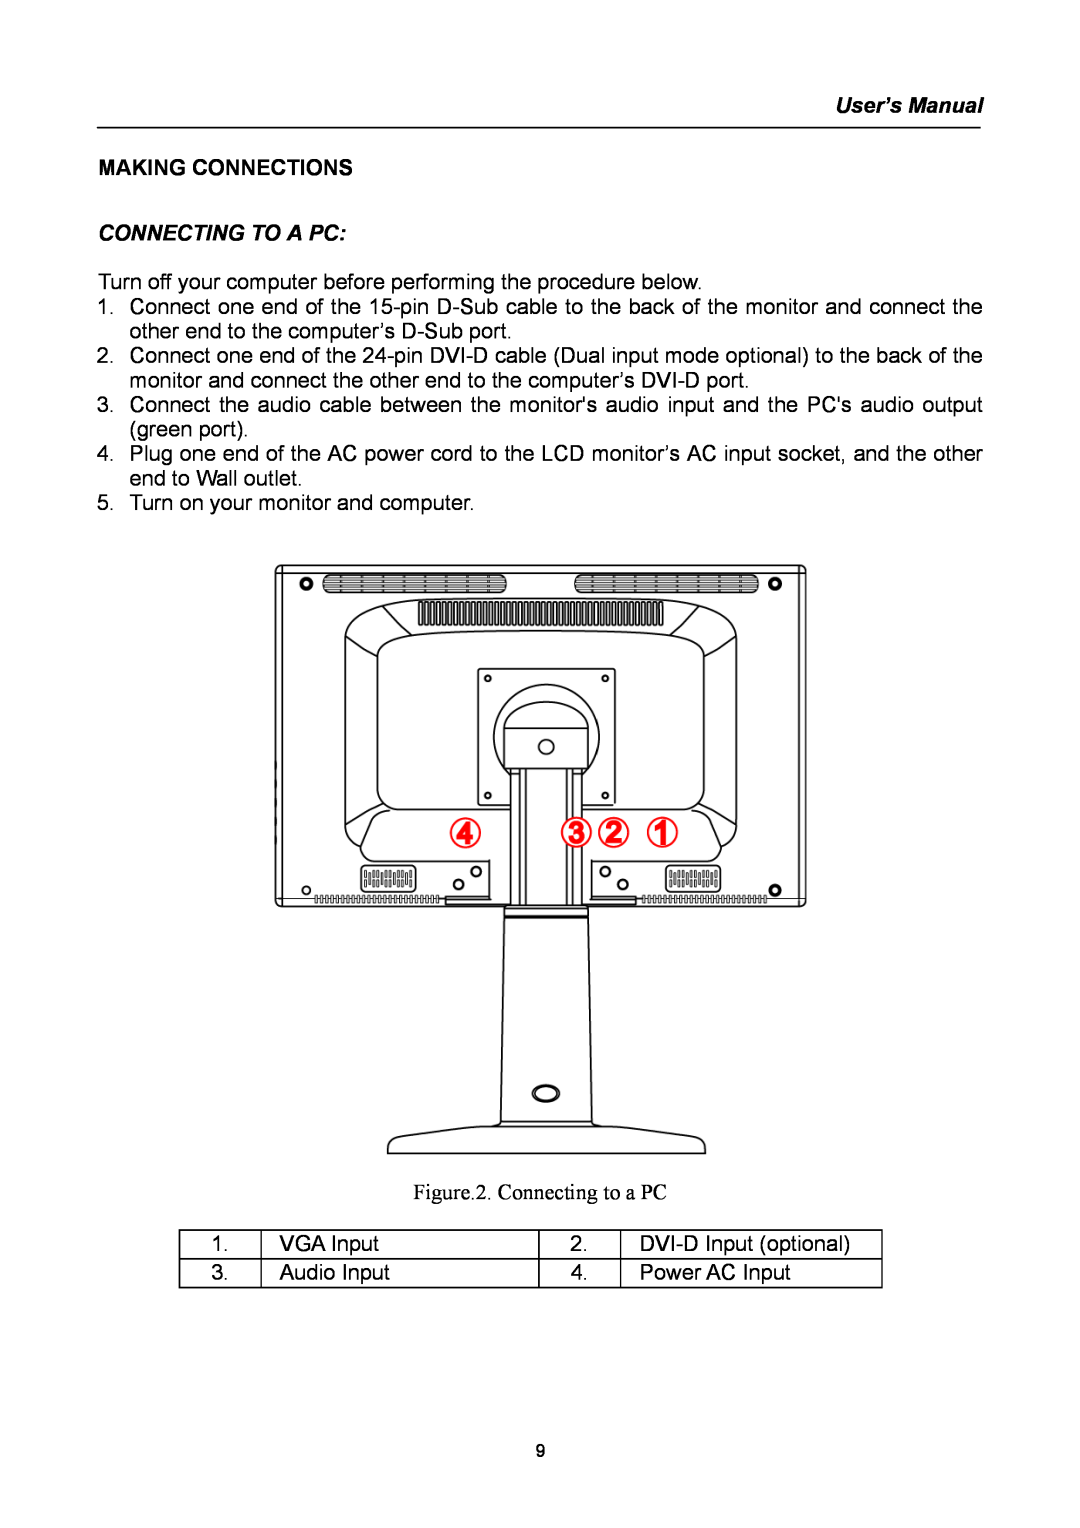 Compaq HW194 user manual User’s Manual, Making Connections, Connecting To A Pc 